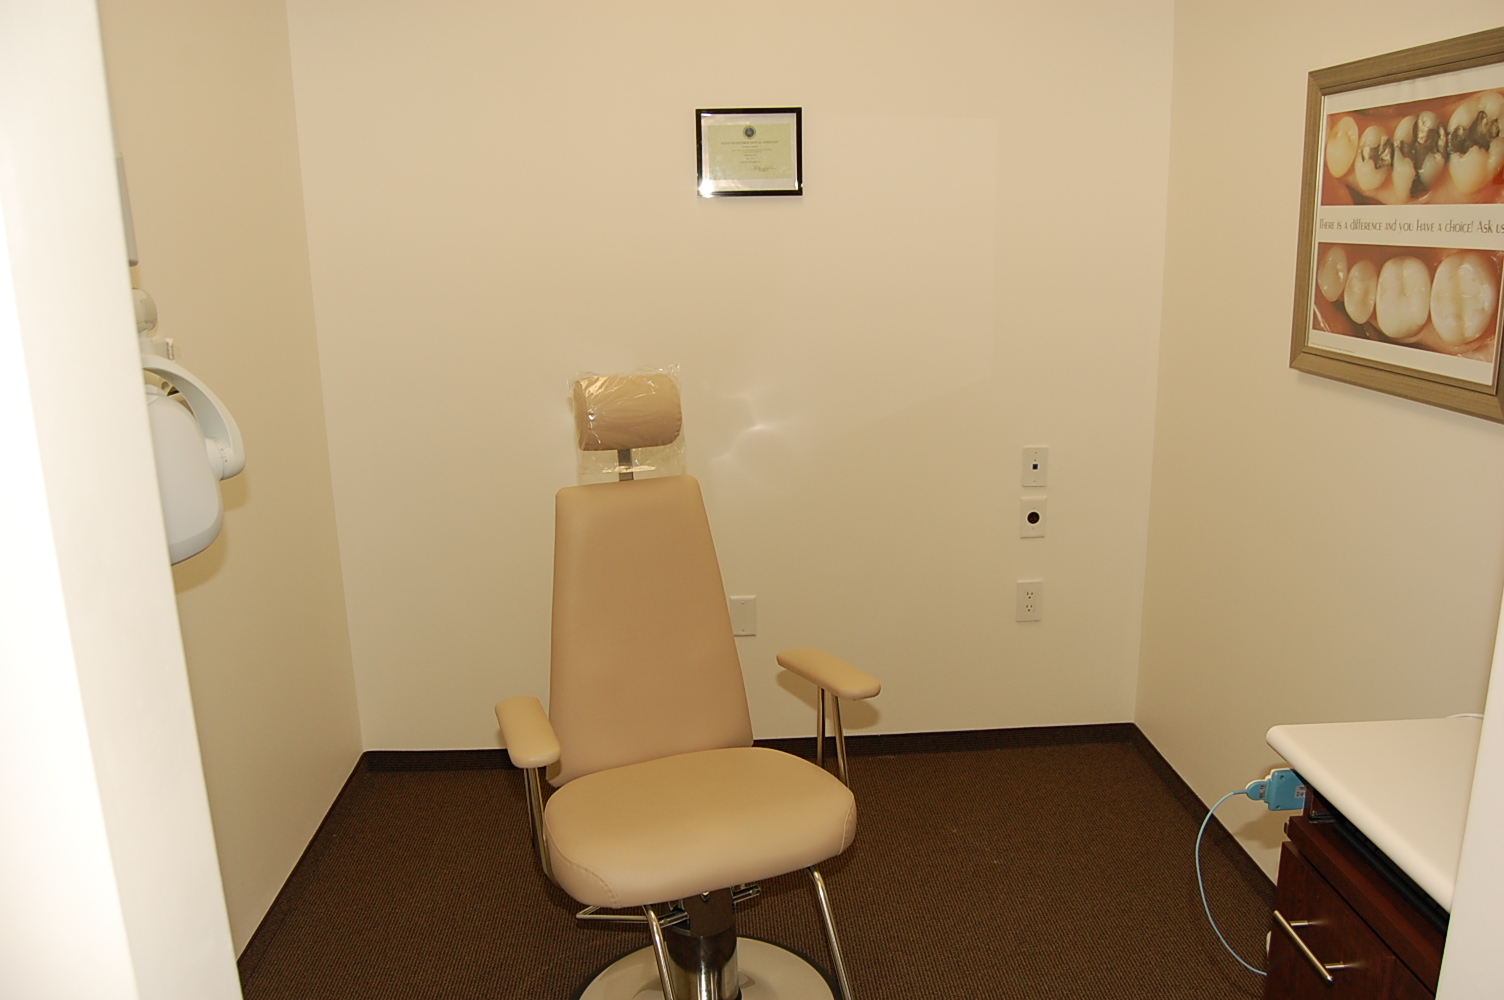 Pearland Modern Dentistry and Orthodontics Photo